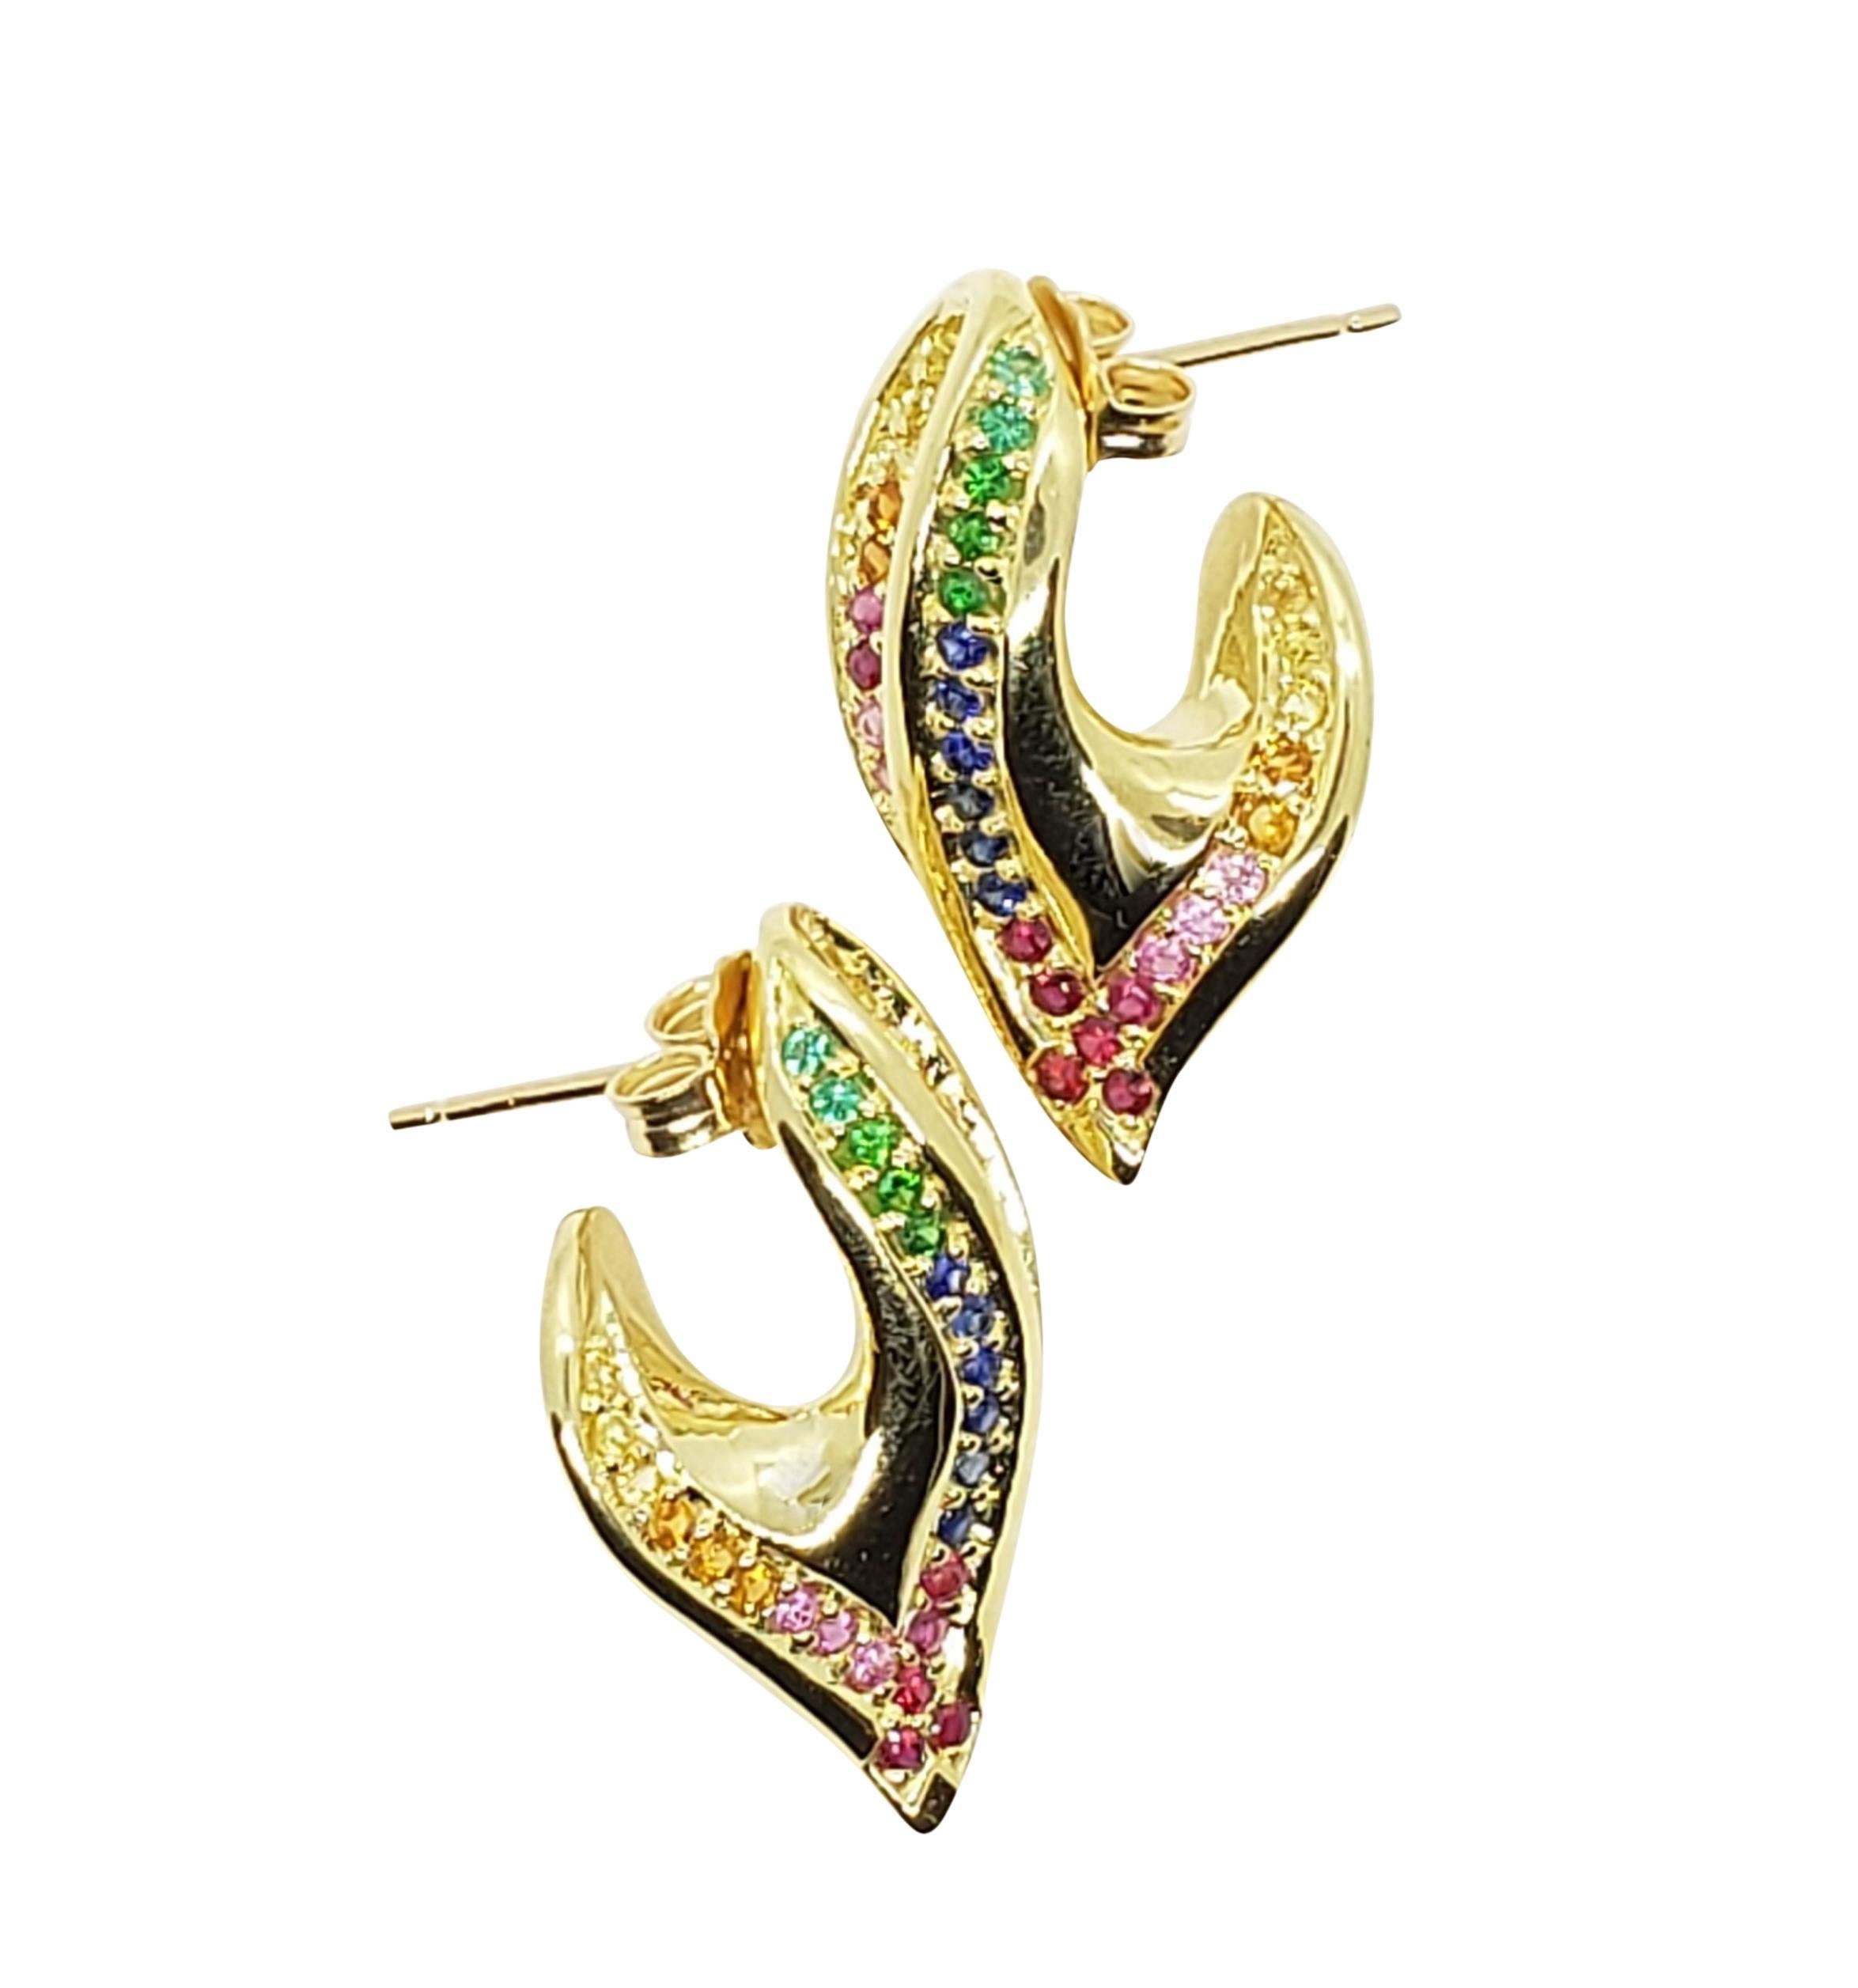 Sculptural Ear Hugging Scarf Earrings in Rainbow Precious Gemstones and 18K Gold In New Condition For Sale In Rutherford, NJ